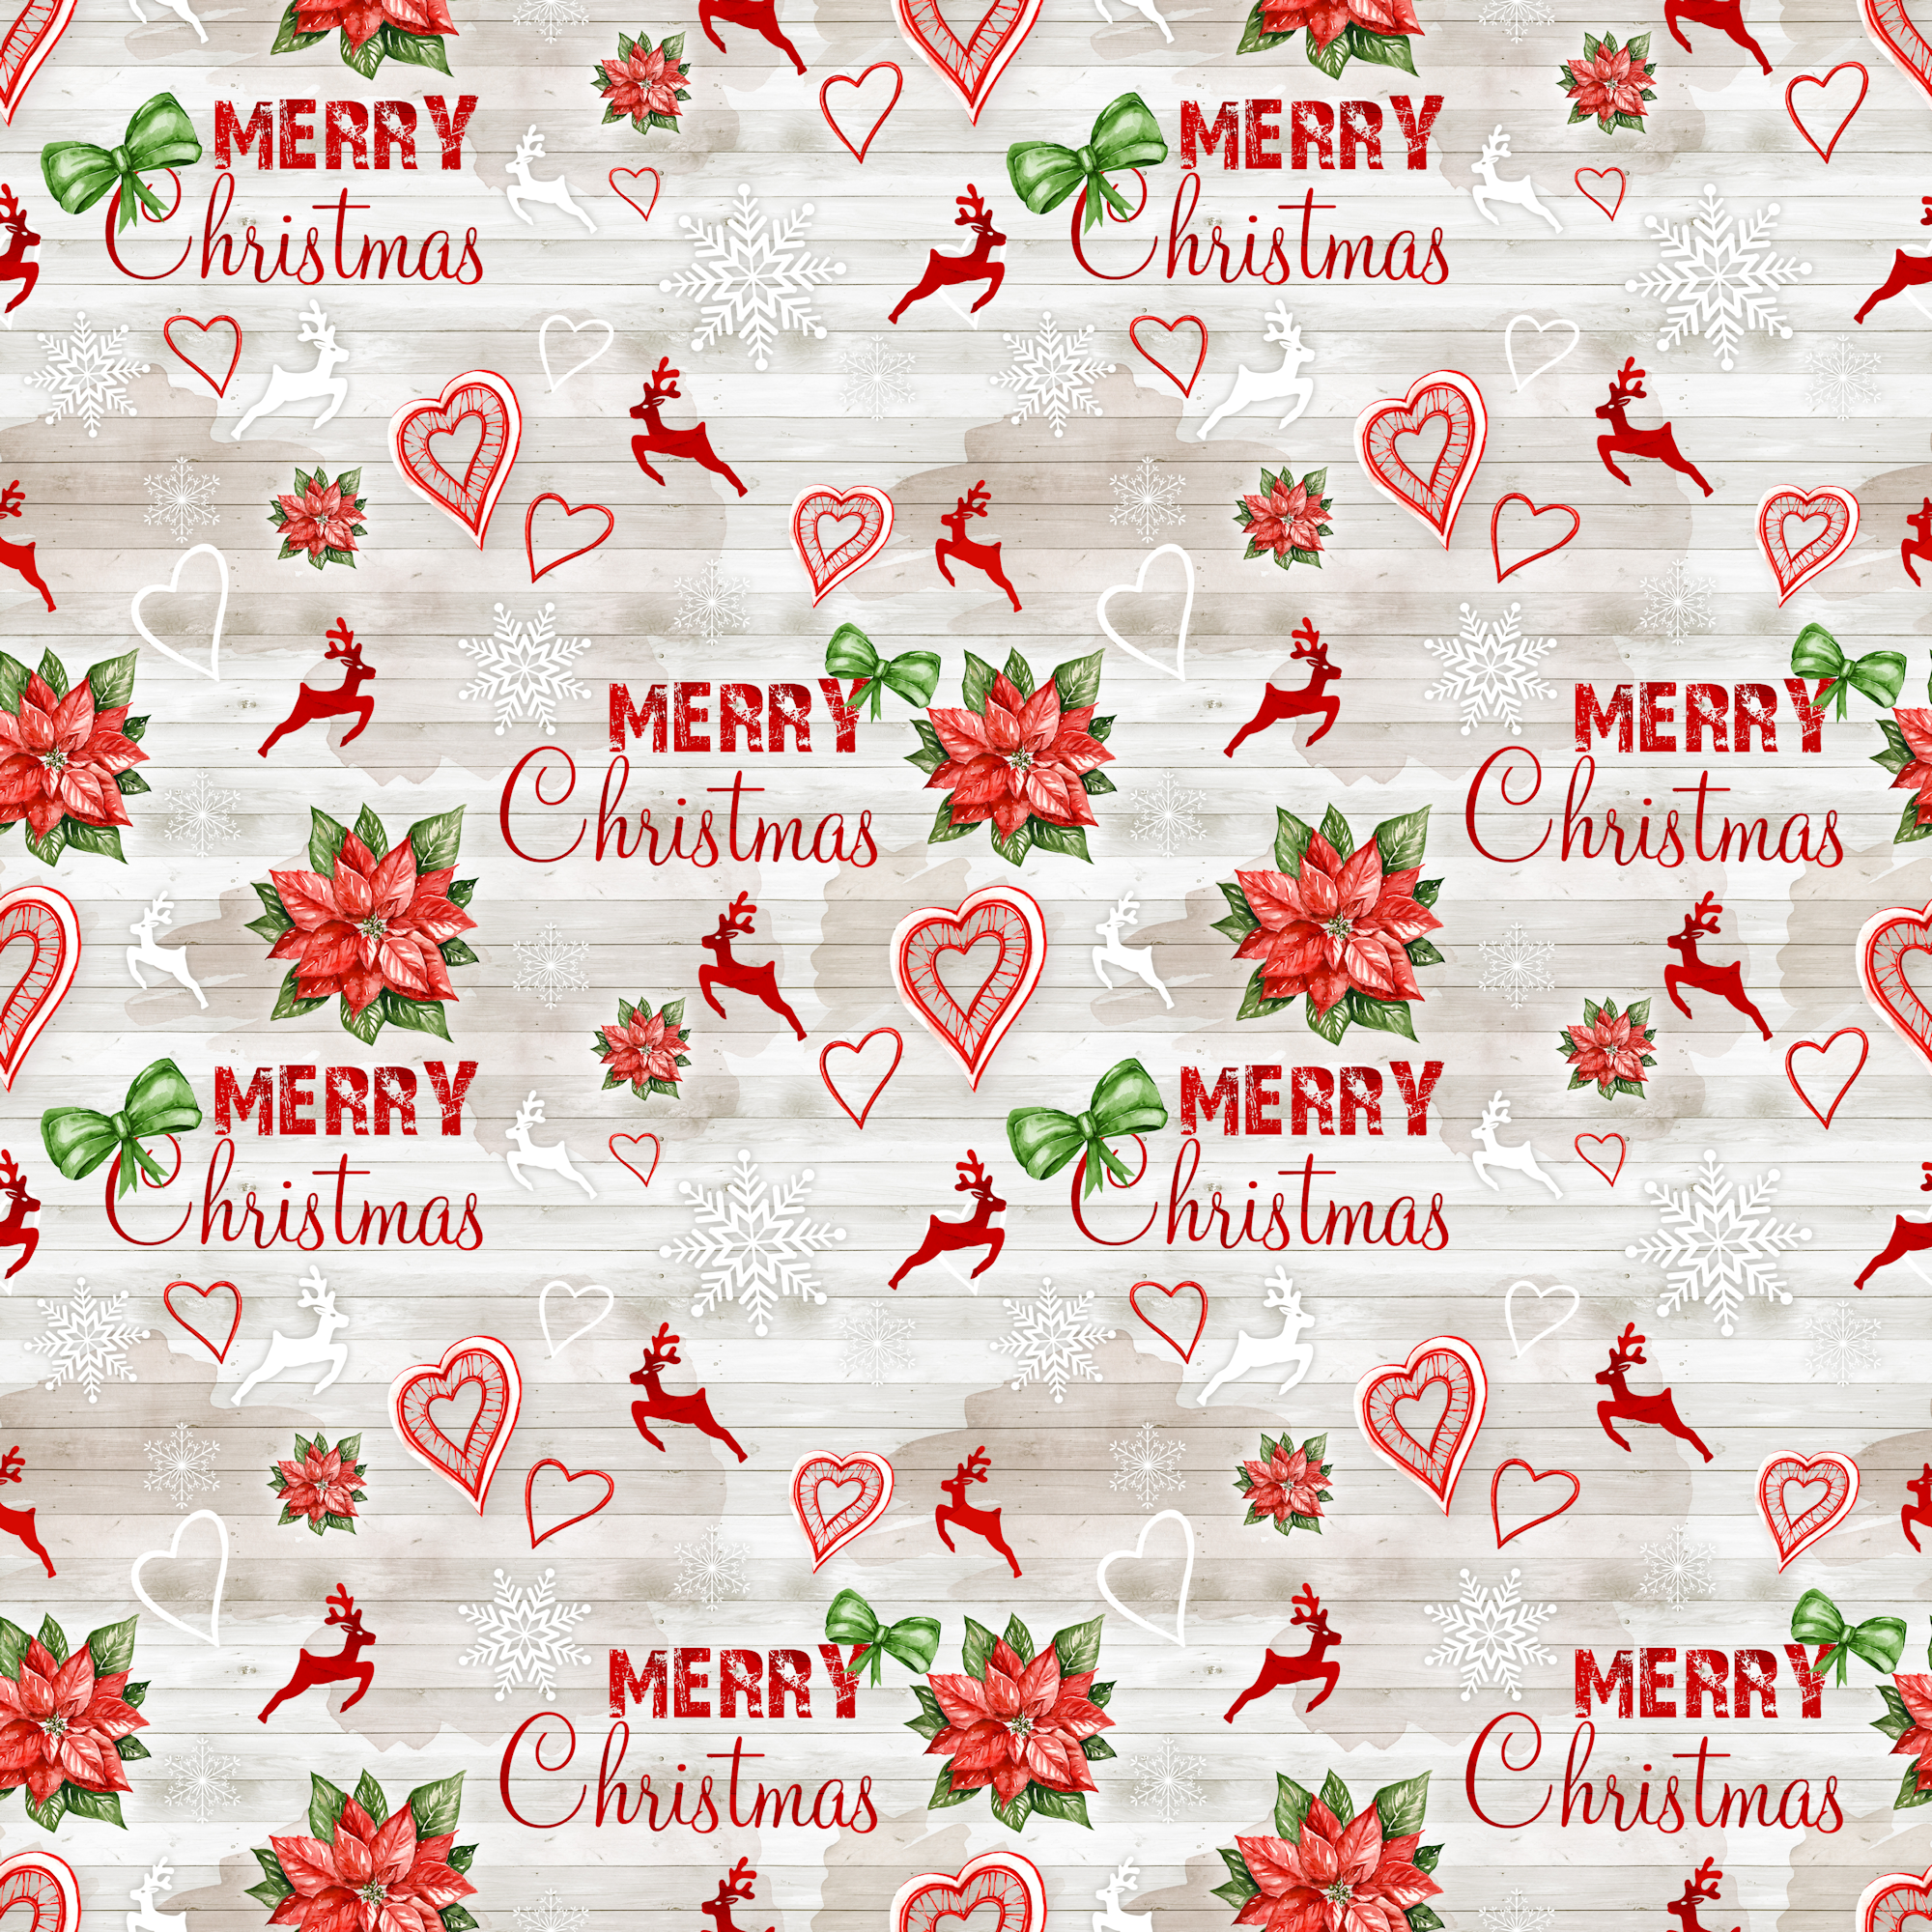 Home For Christmas Collection Merry Christmas 12 x 12 Double-Sided Scrapbook Paper by SSC Designs